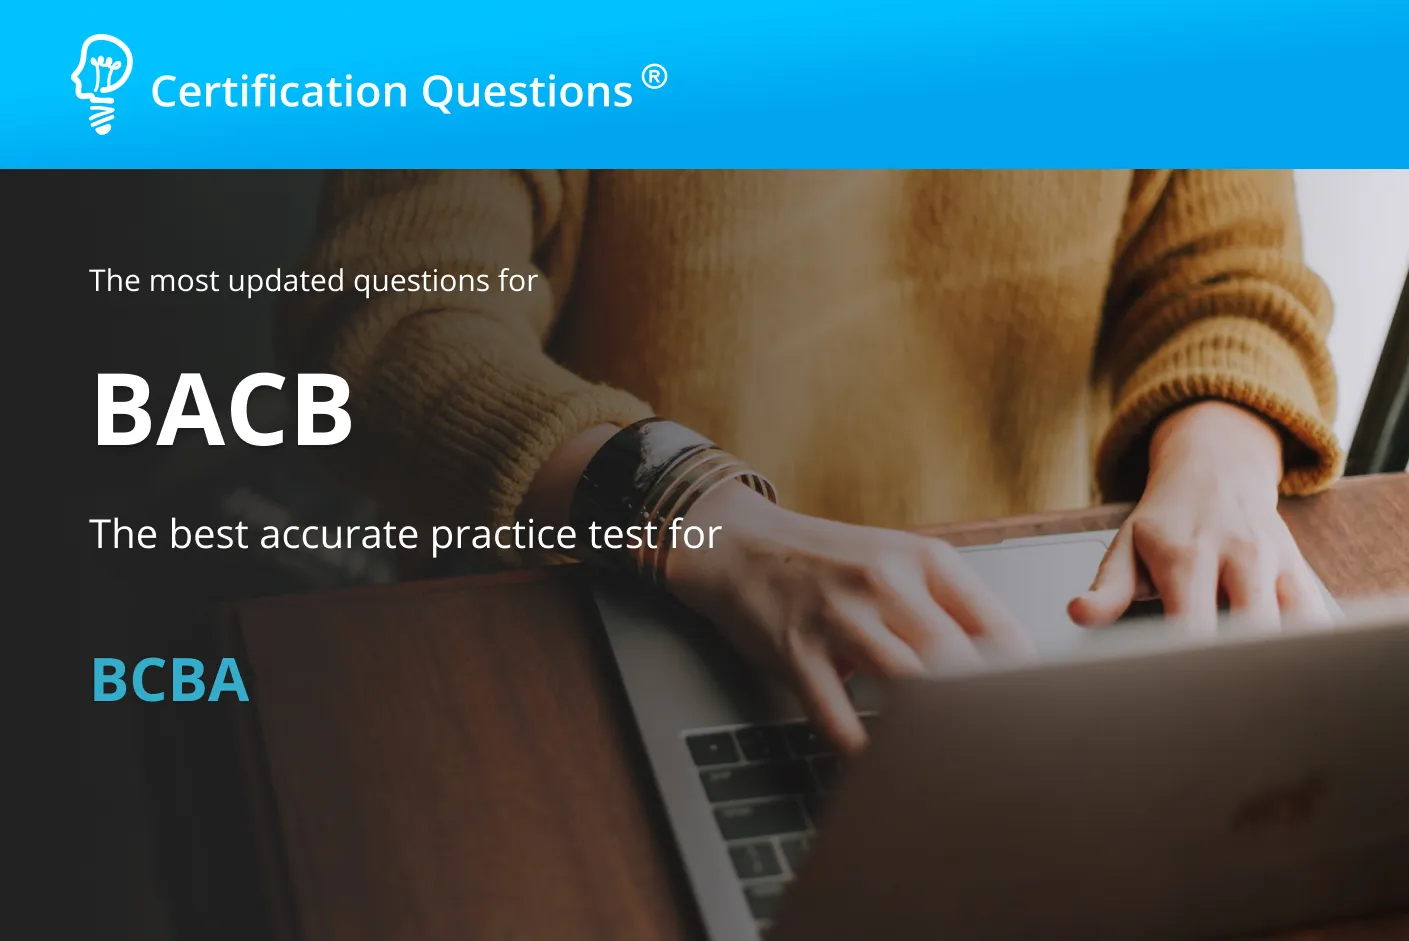 Here is the image for the BCBA exam questions in the United States of America. Start learning now.